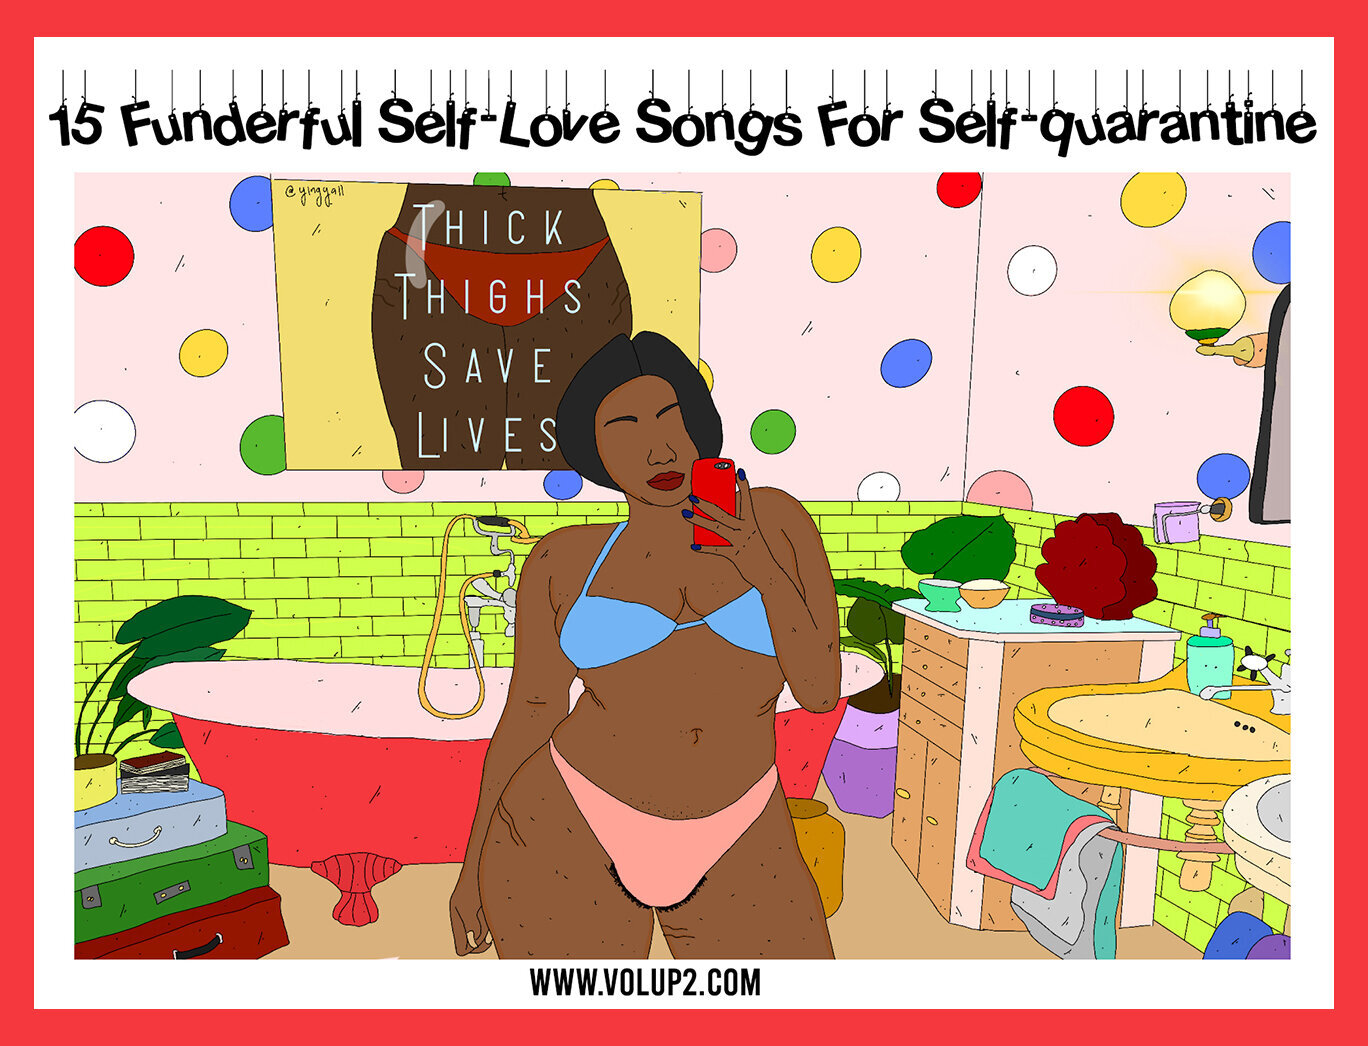 15 Funderful Self Love Songs For Self Quarantine Written By Ha Linh Illustrations By Yingyall Translated By Jordan Riviere Vol Up 2